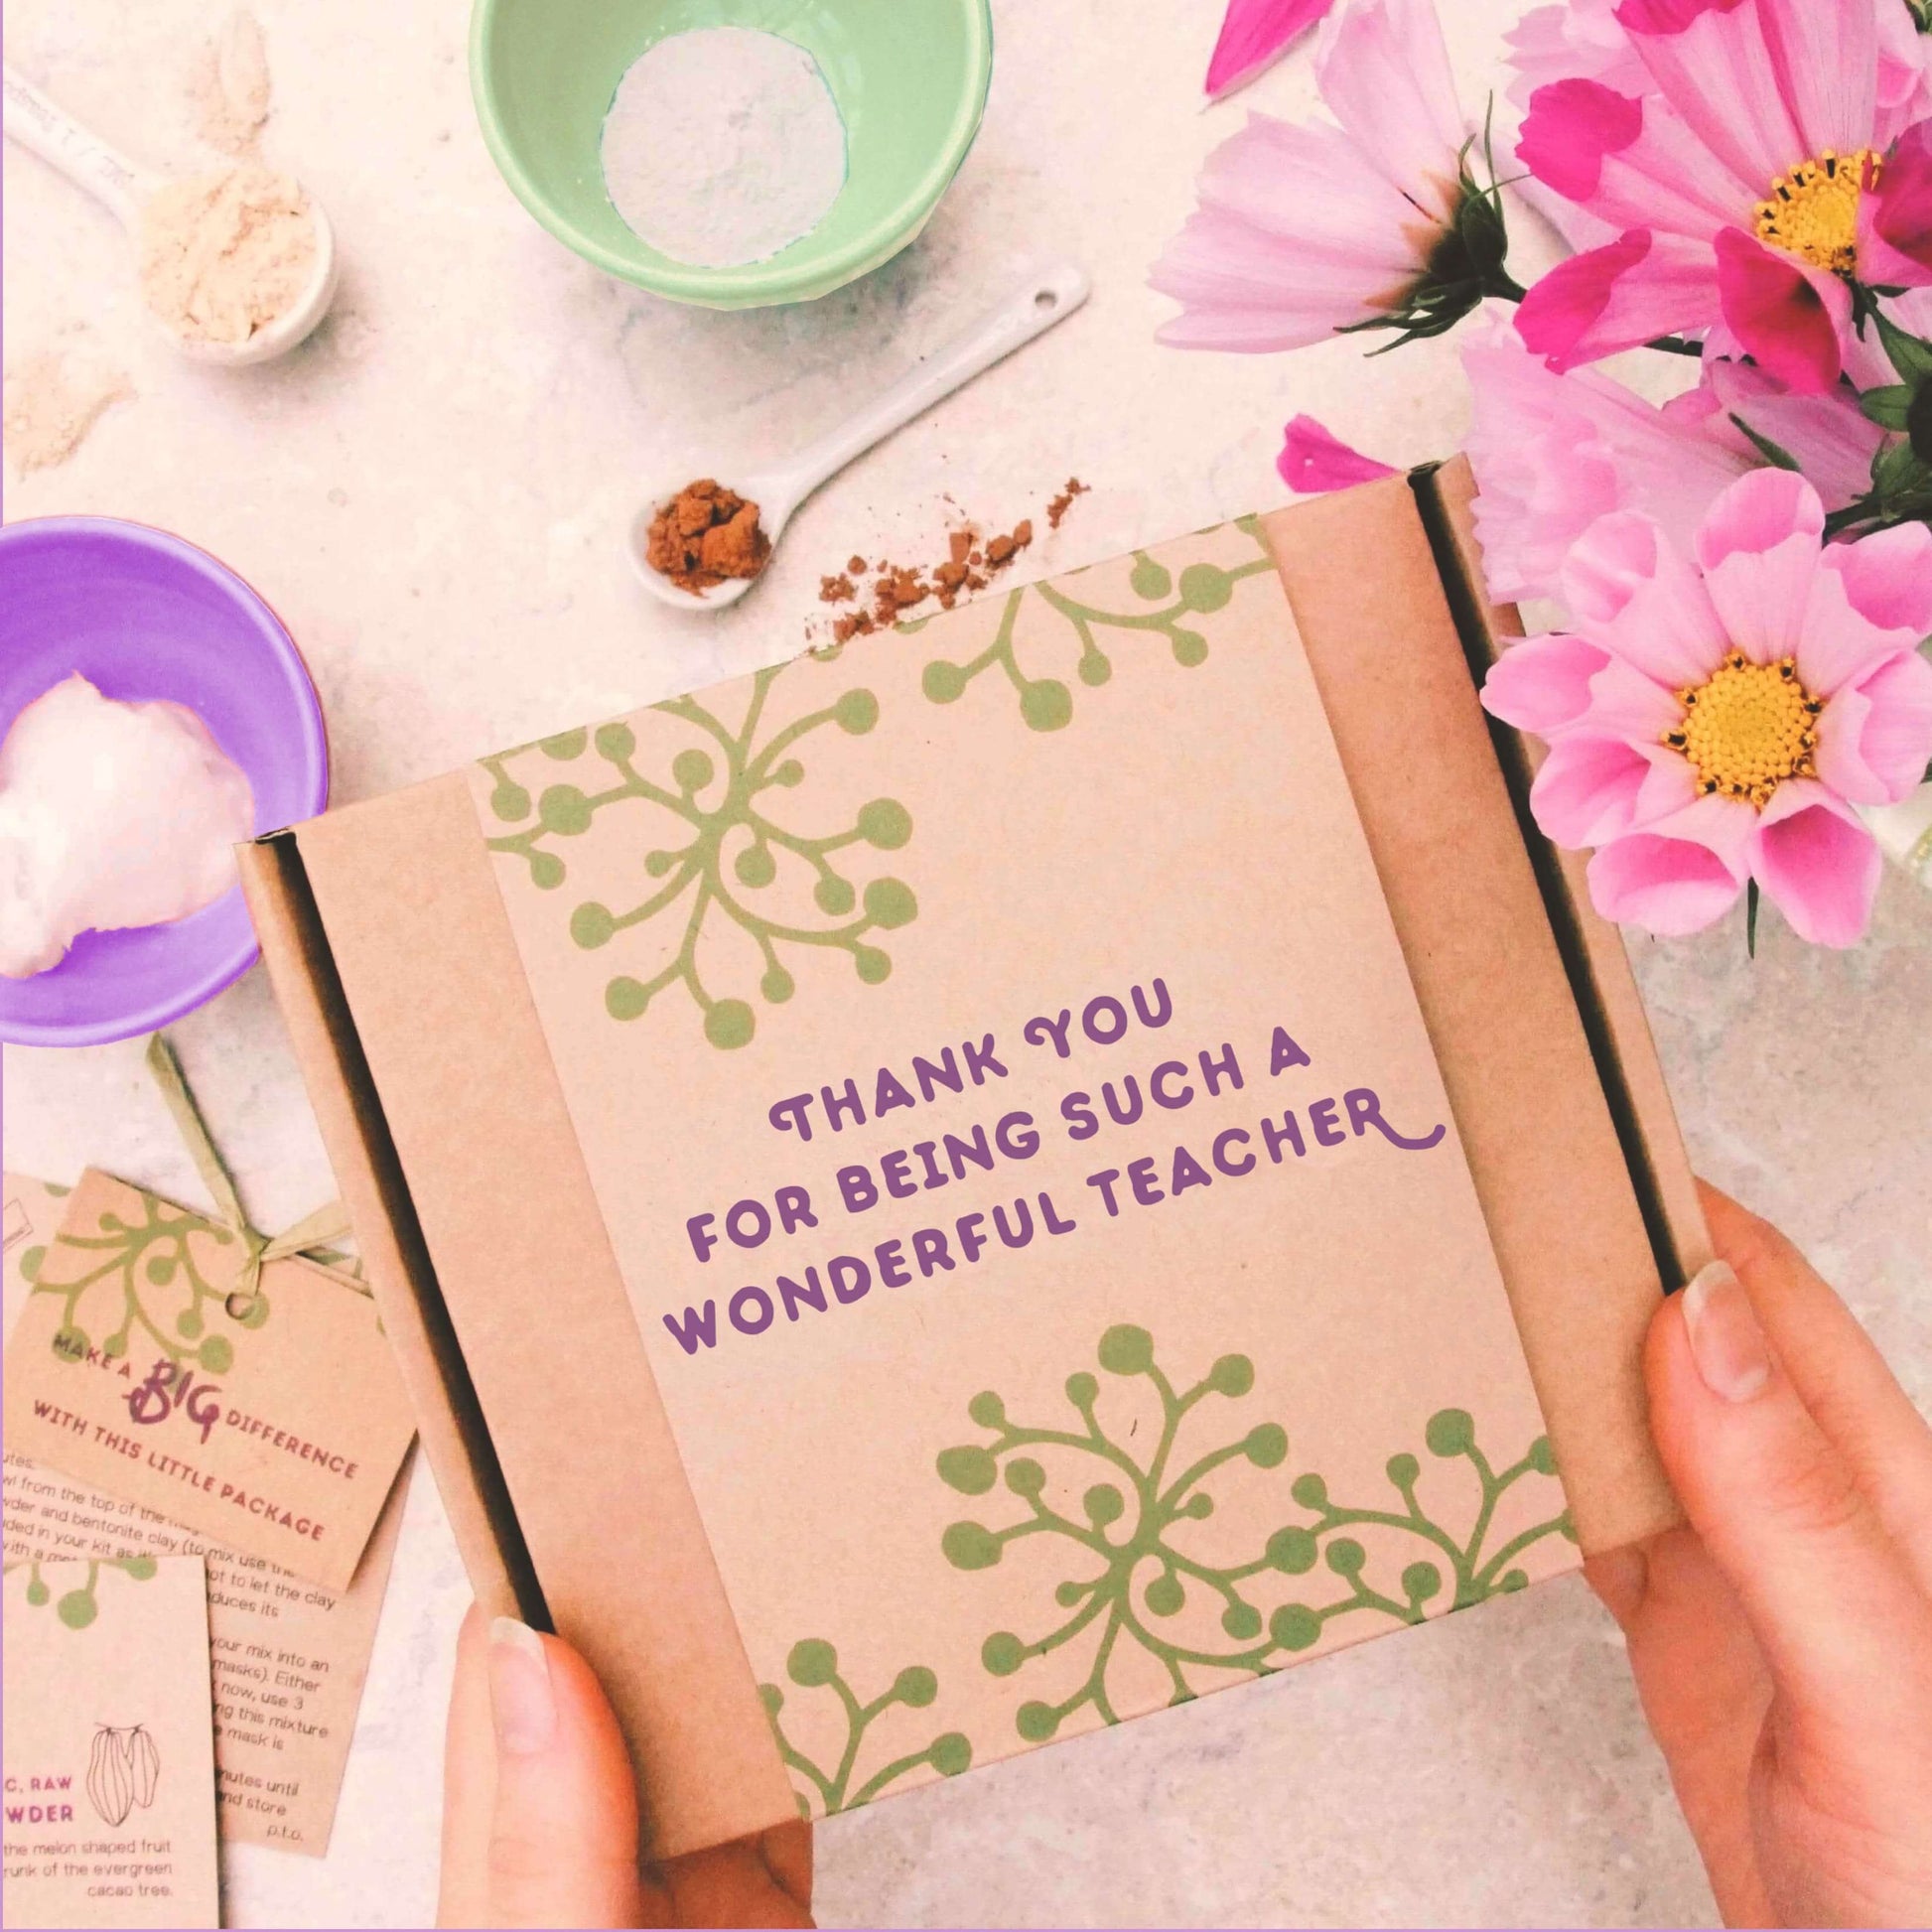 teacher thank you gift with gift message 'thank you for being such a wonderful teacher'